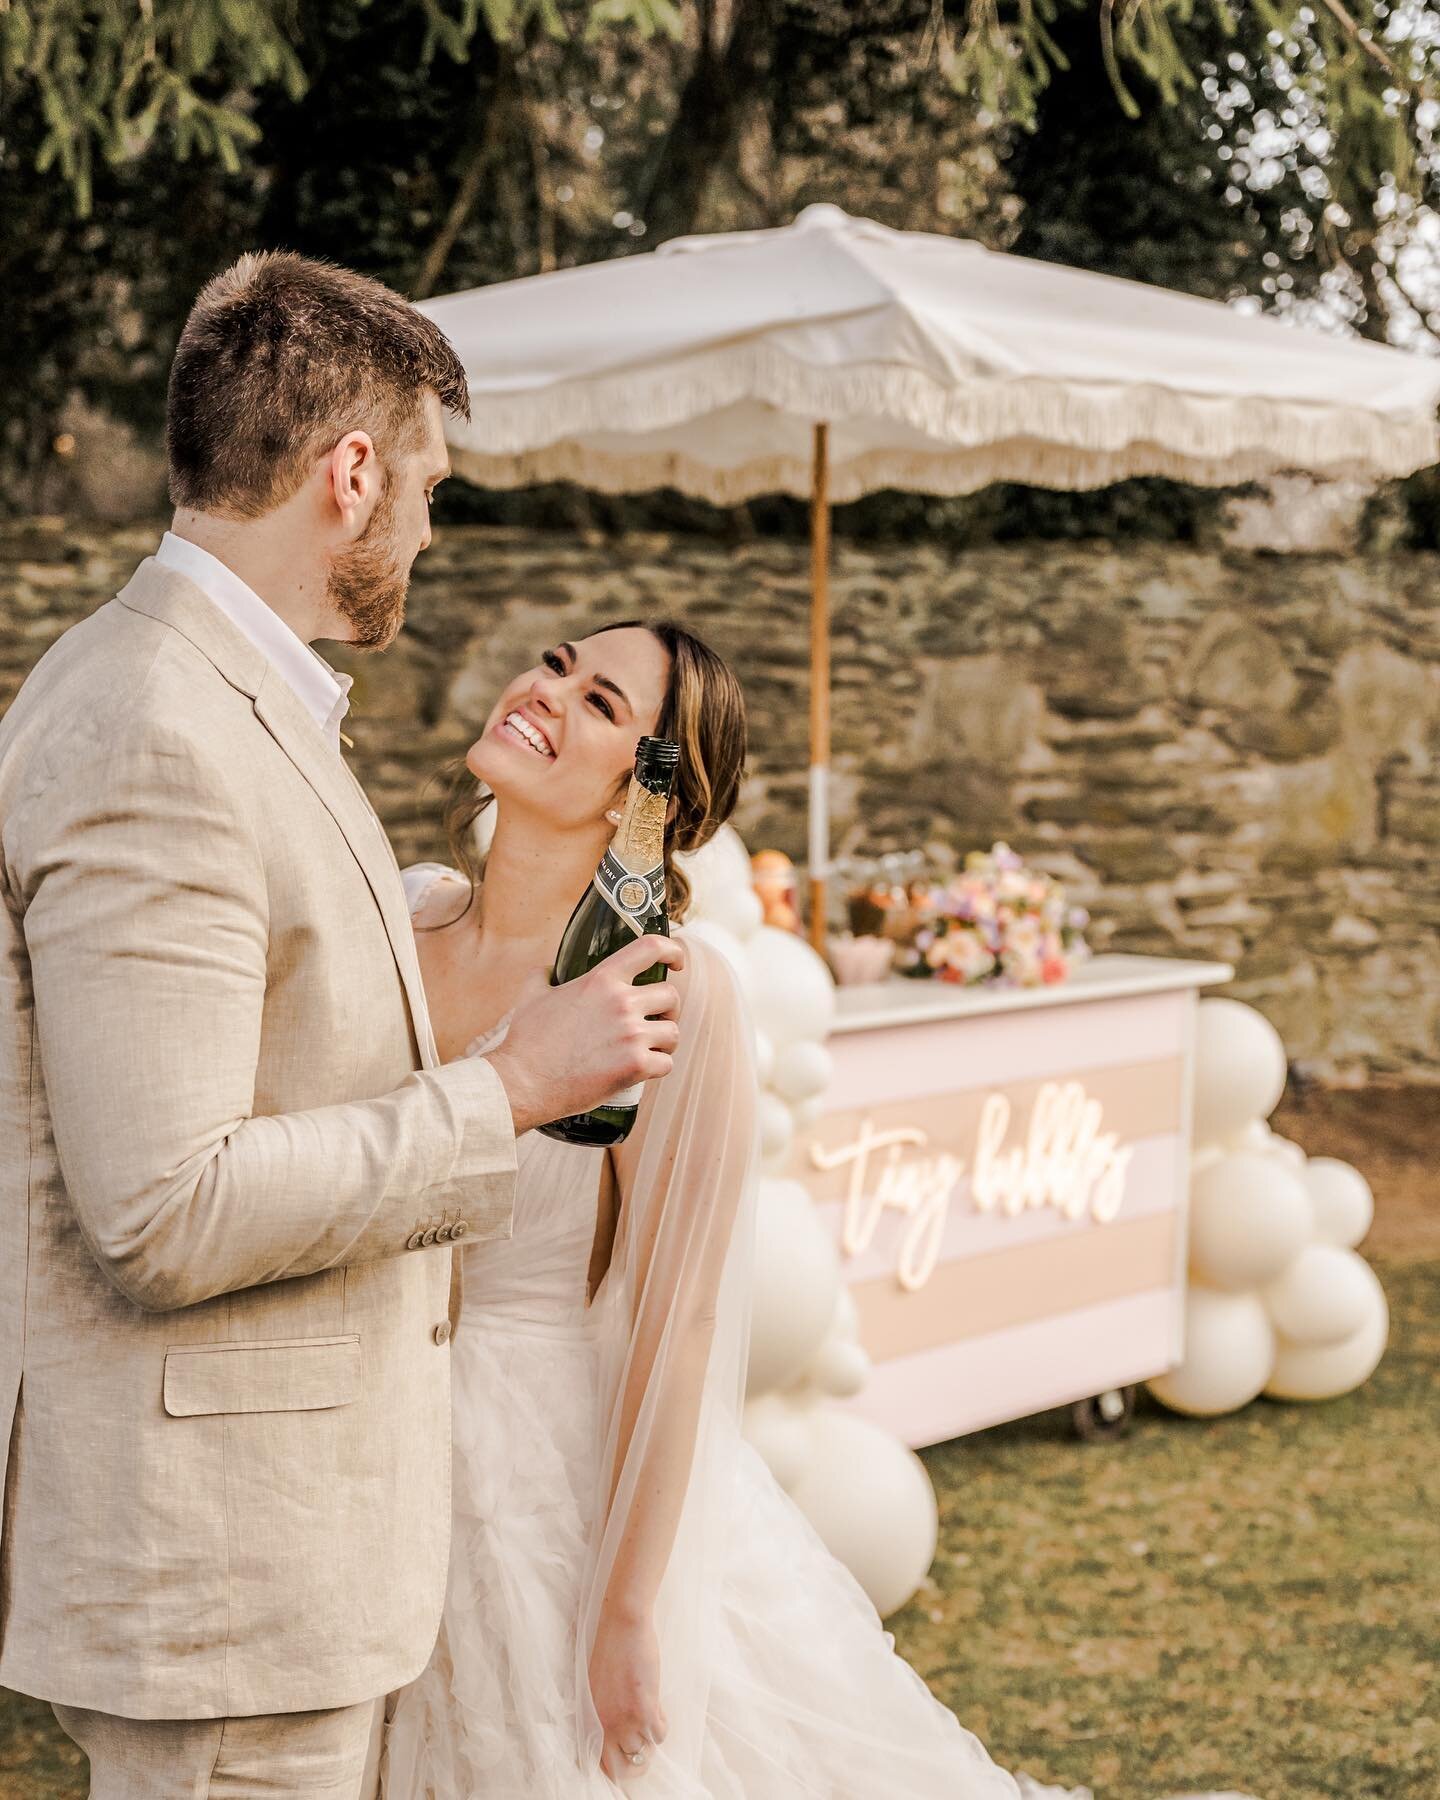 tiny bubbles makes the best addition to cocktail hour or pre-ceremony drinks. Some brides have even asked for us to serve the bridal parties while getting ready. It&rsquo;s also so fun to pop a bottle right after first look! 🍾

&bull; VENDORS &bull;